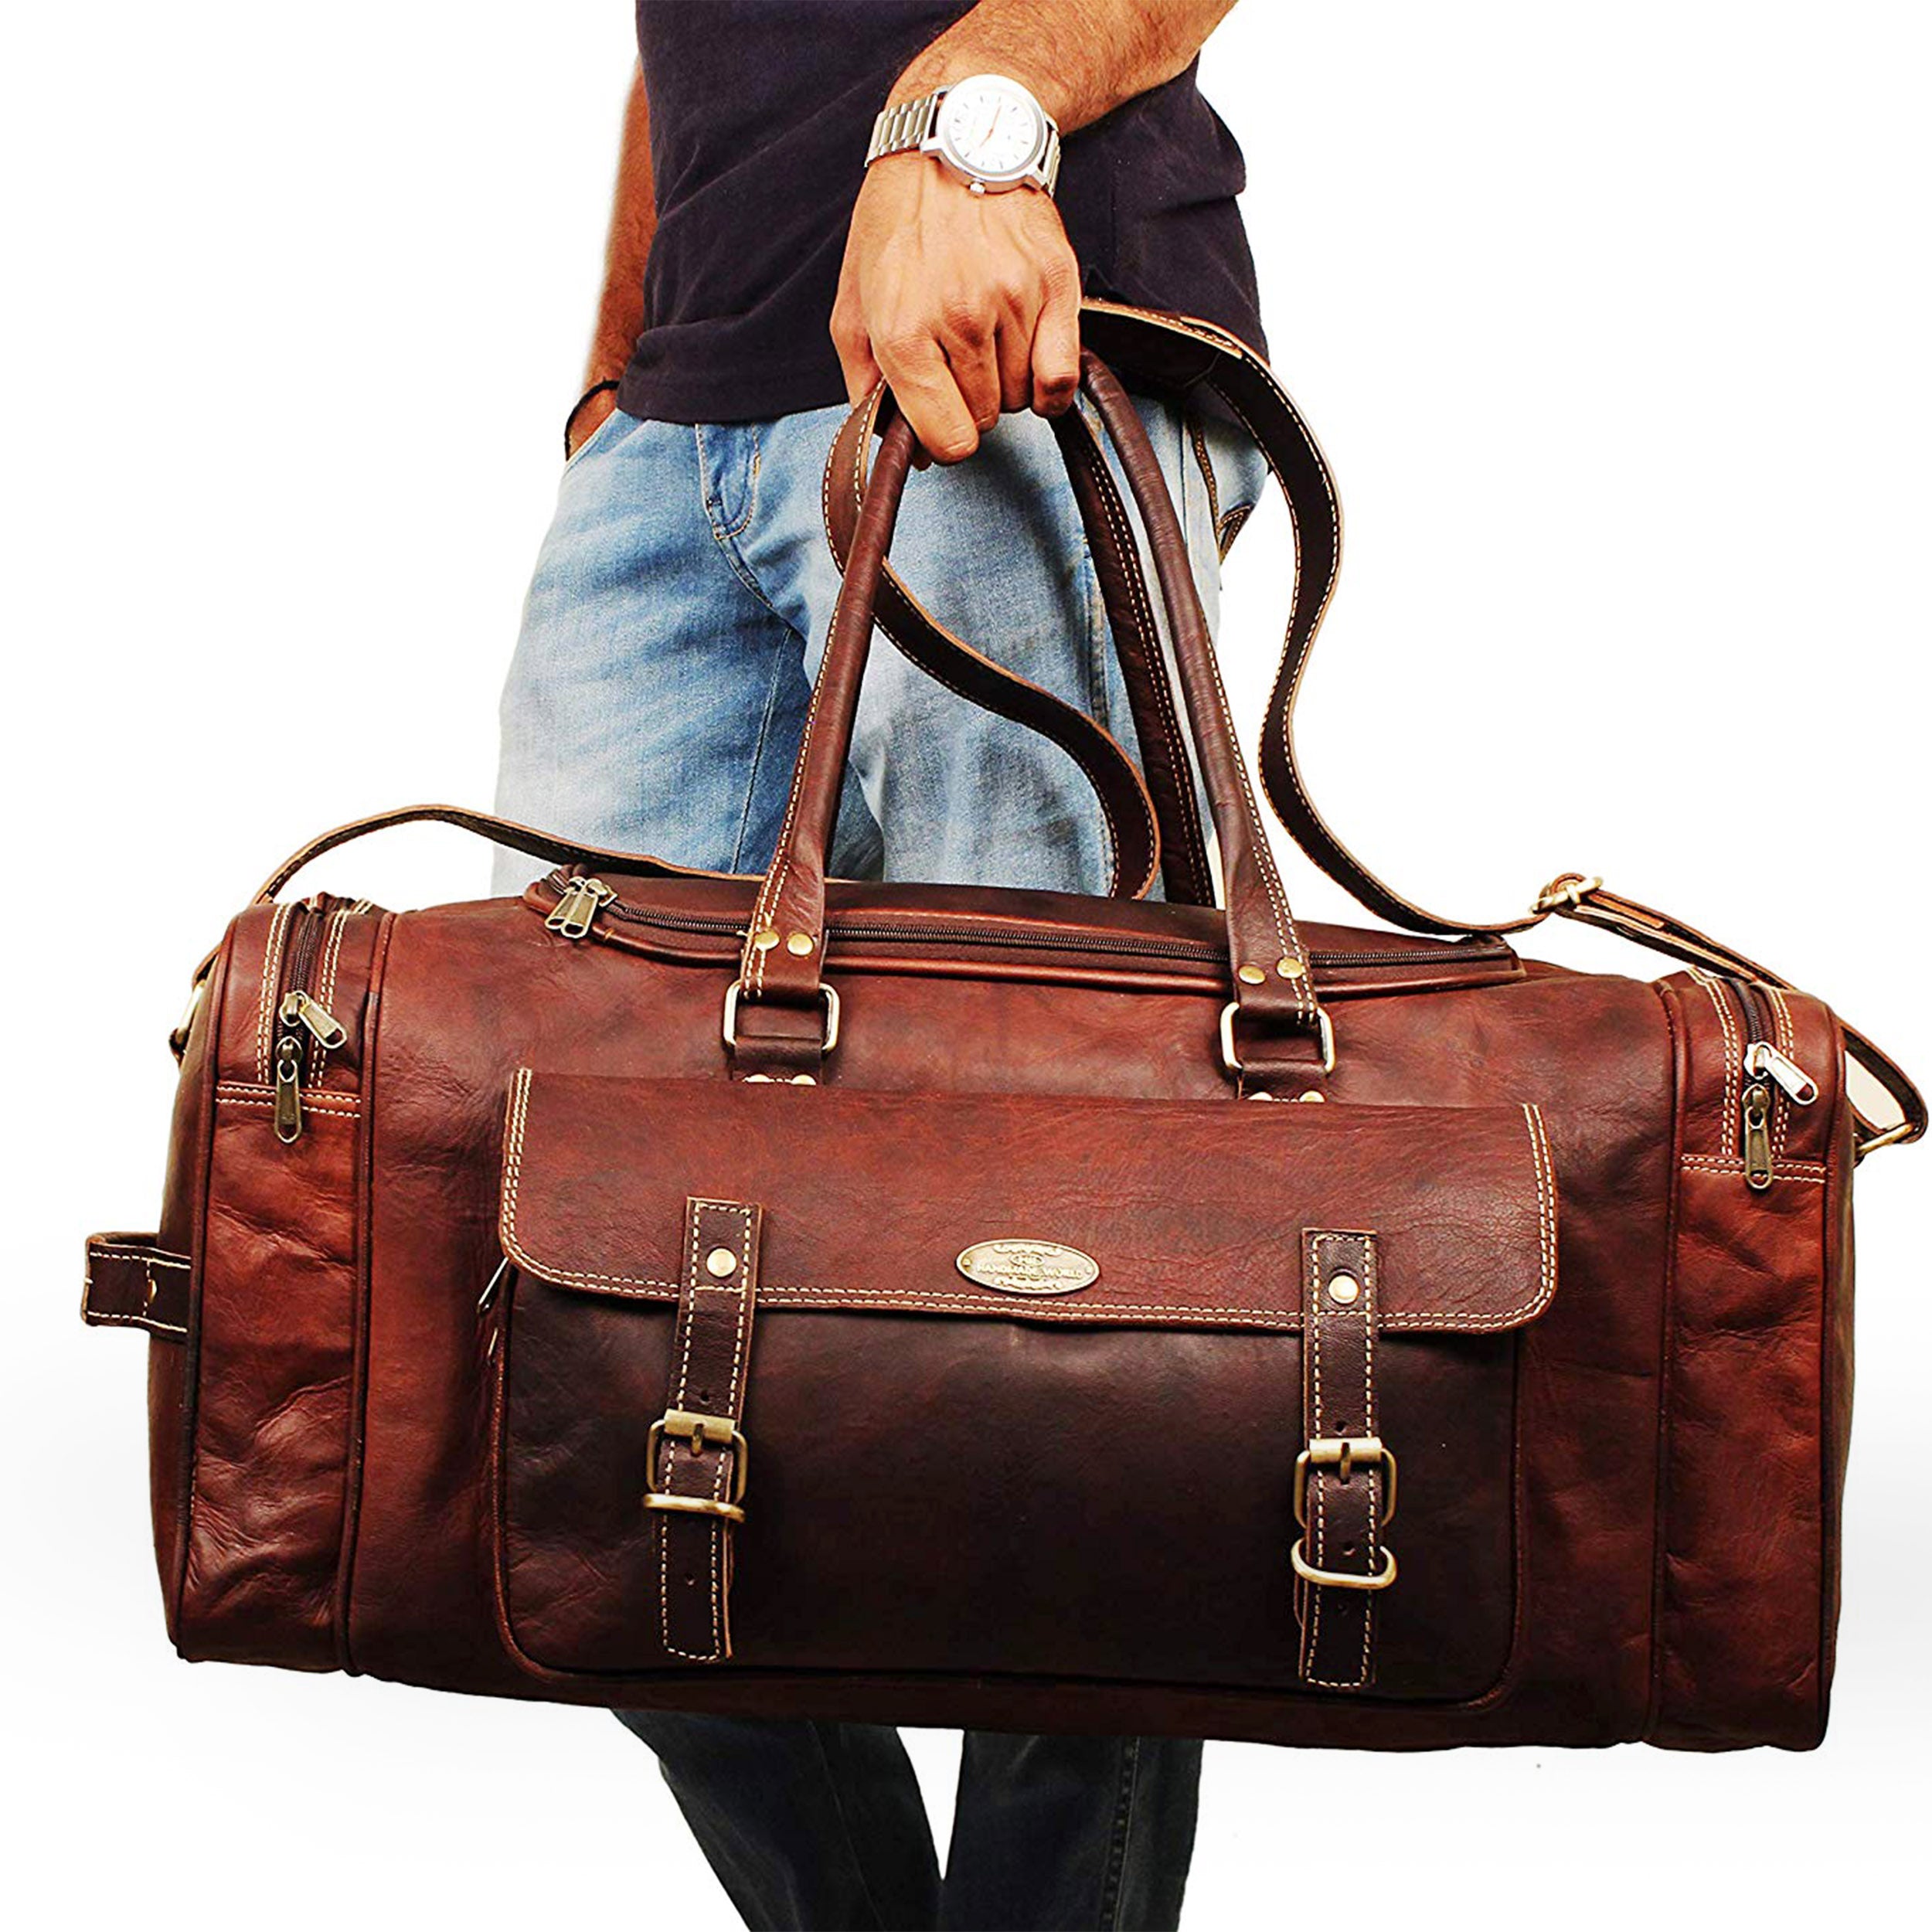 large Leather travel duffle bag for men women